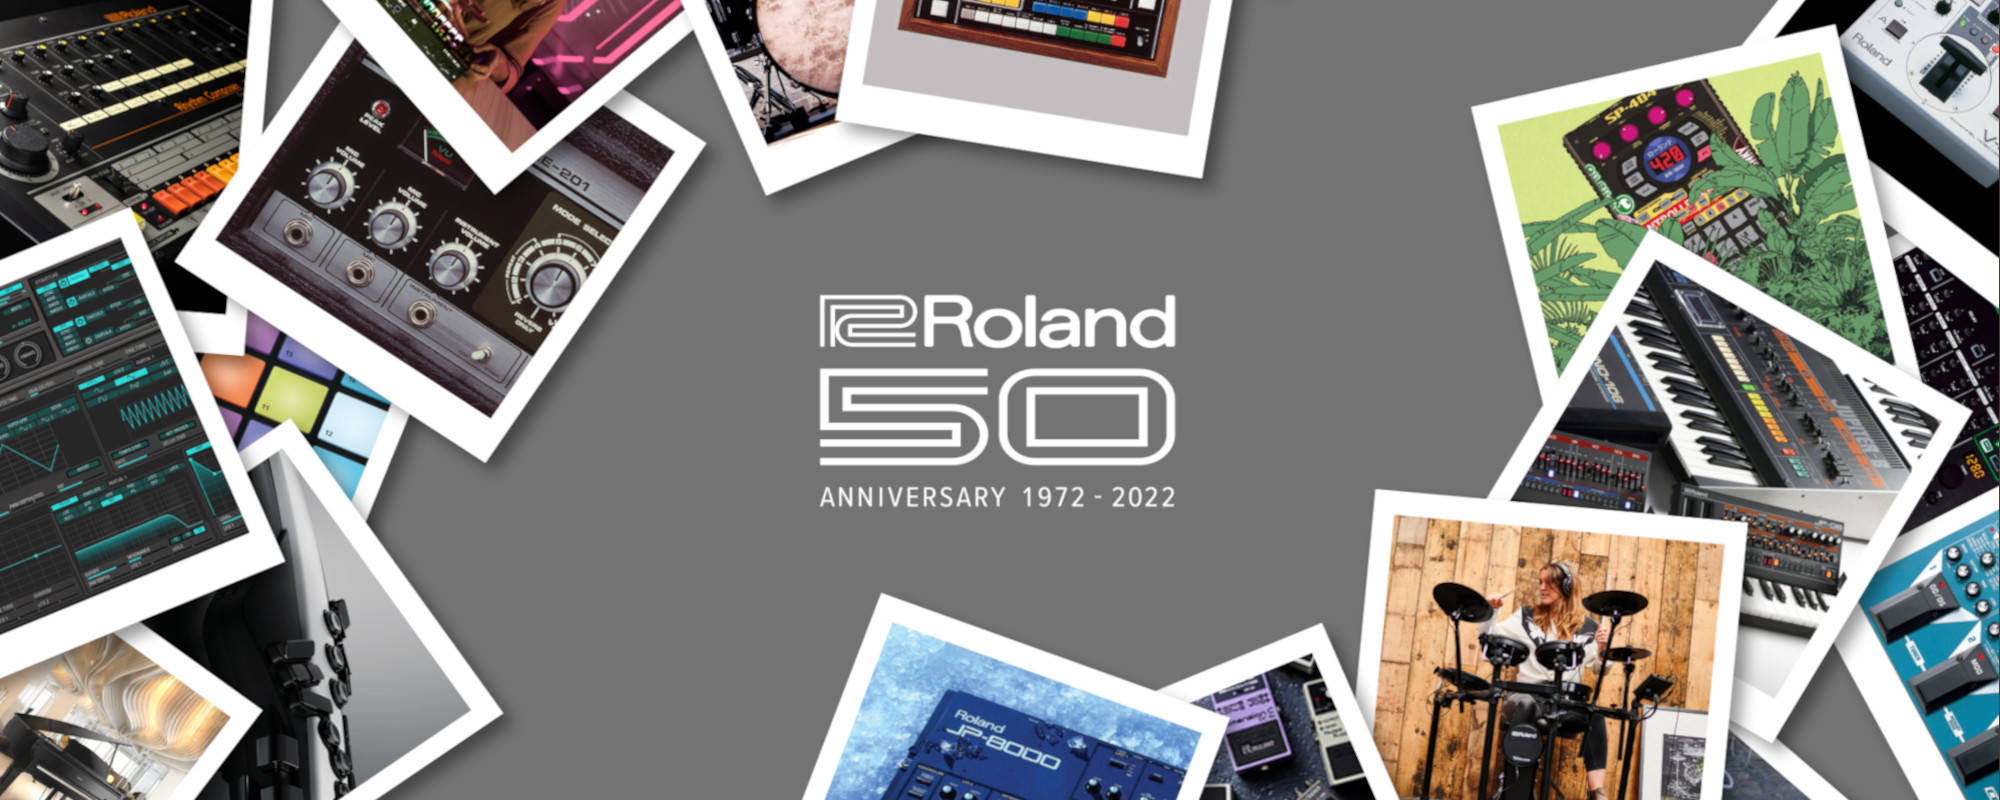 Gear: Roland Commemorates 50 Years of Innovation